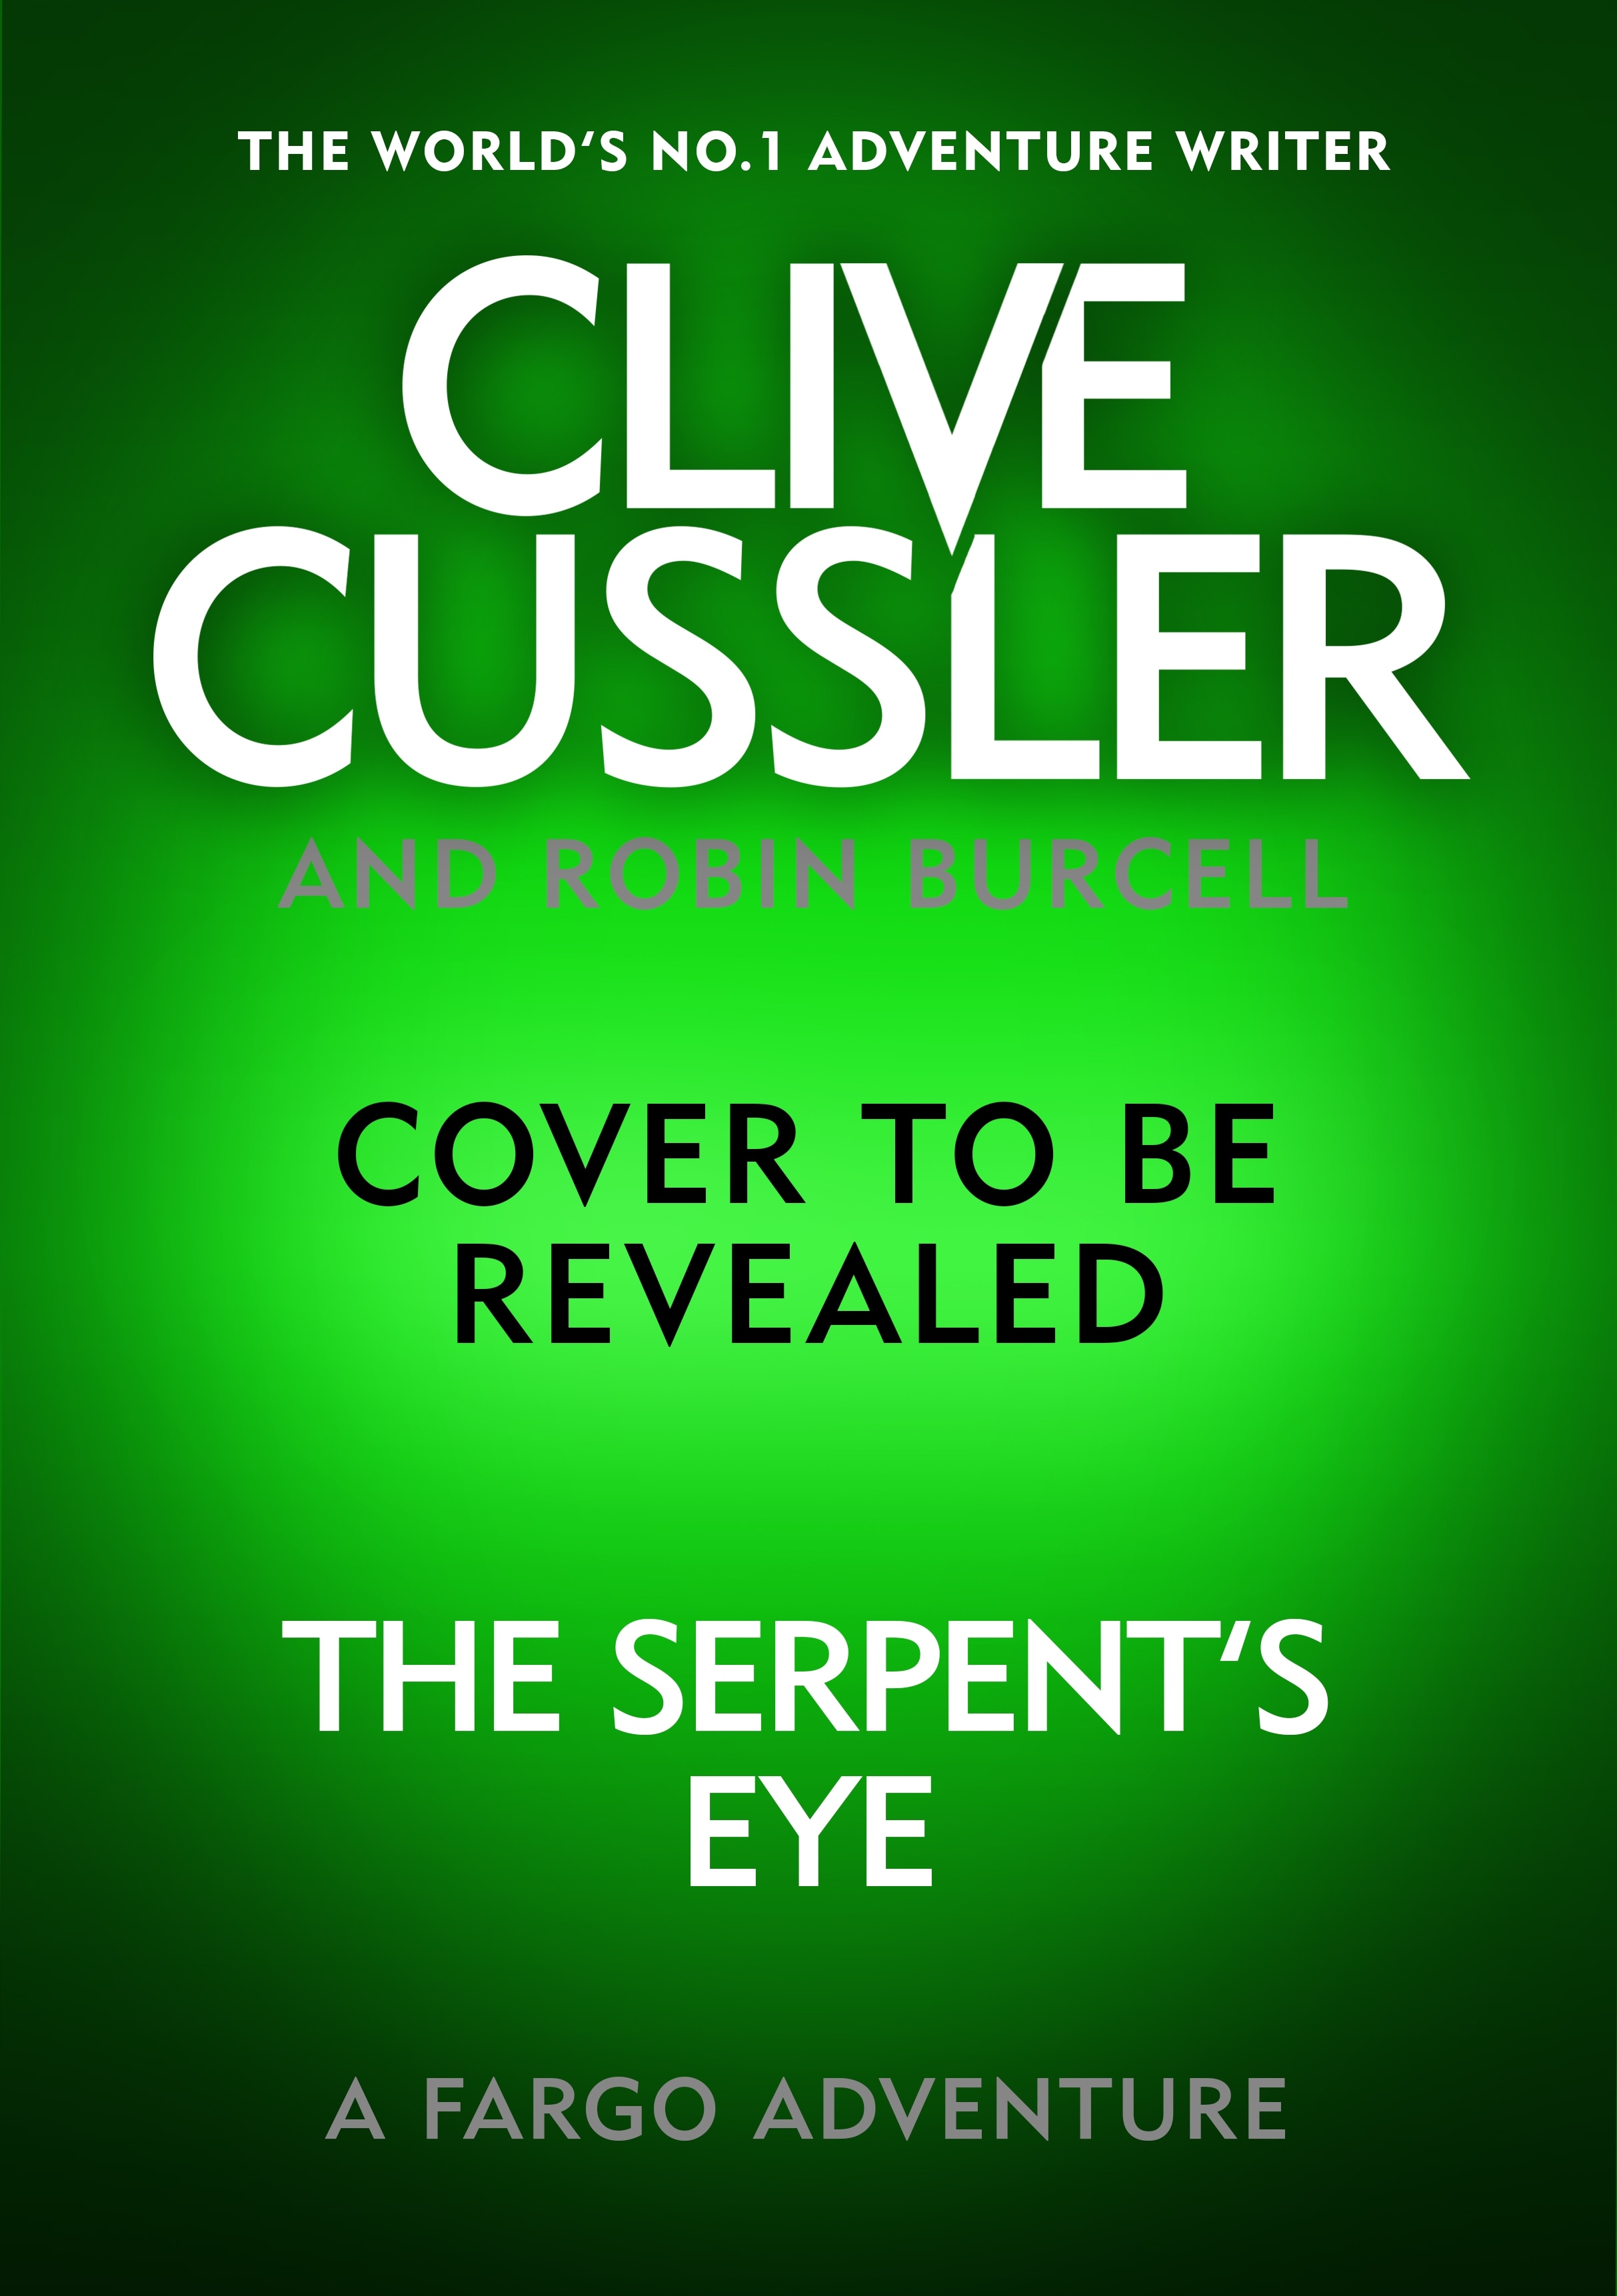 Book “Clive Cussler's The Serpent's Eye” by Robin Burcell — April 14, 2022